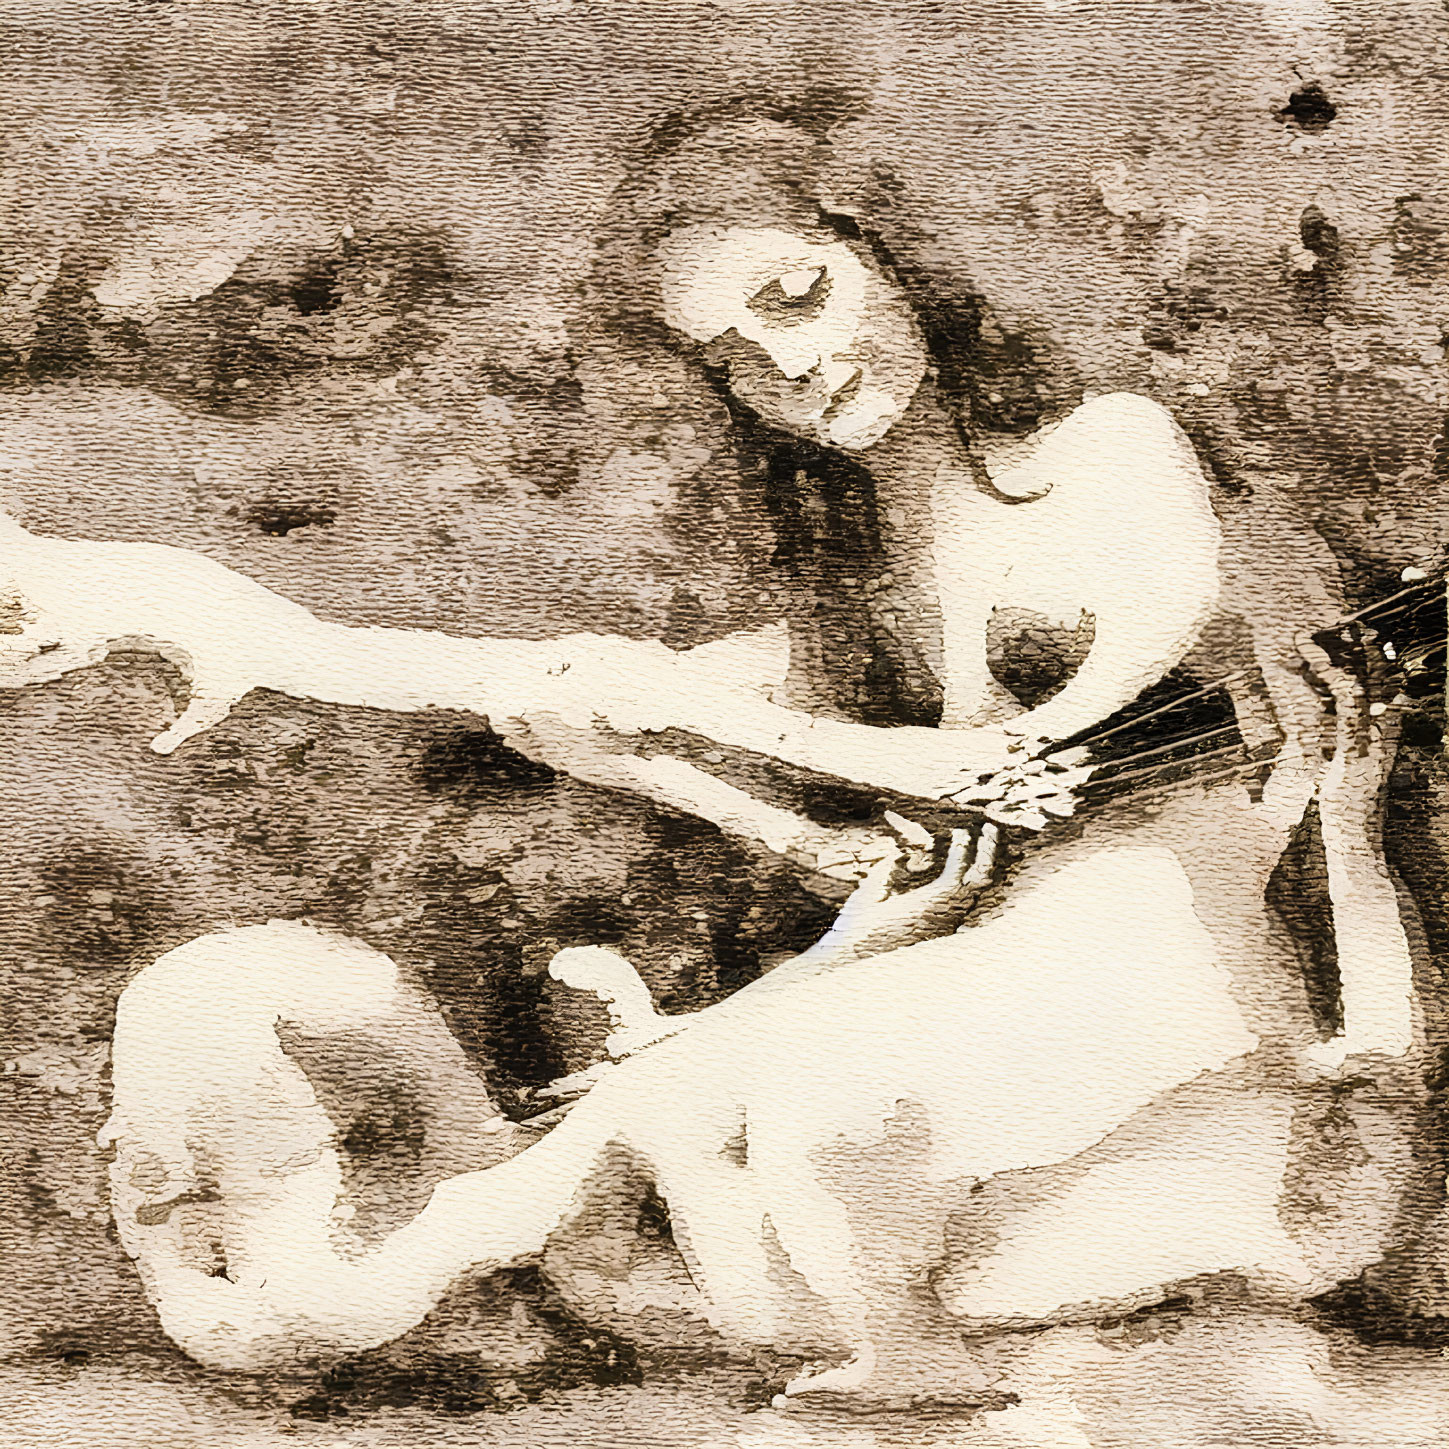 Vintage sepia-toned image of woman playing stringed instrument